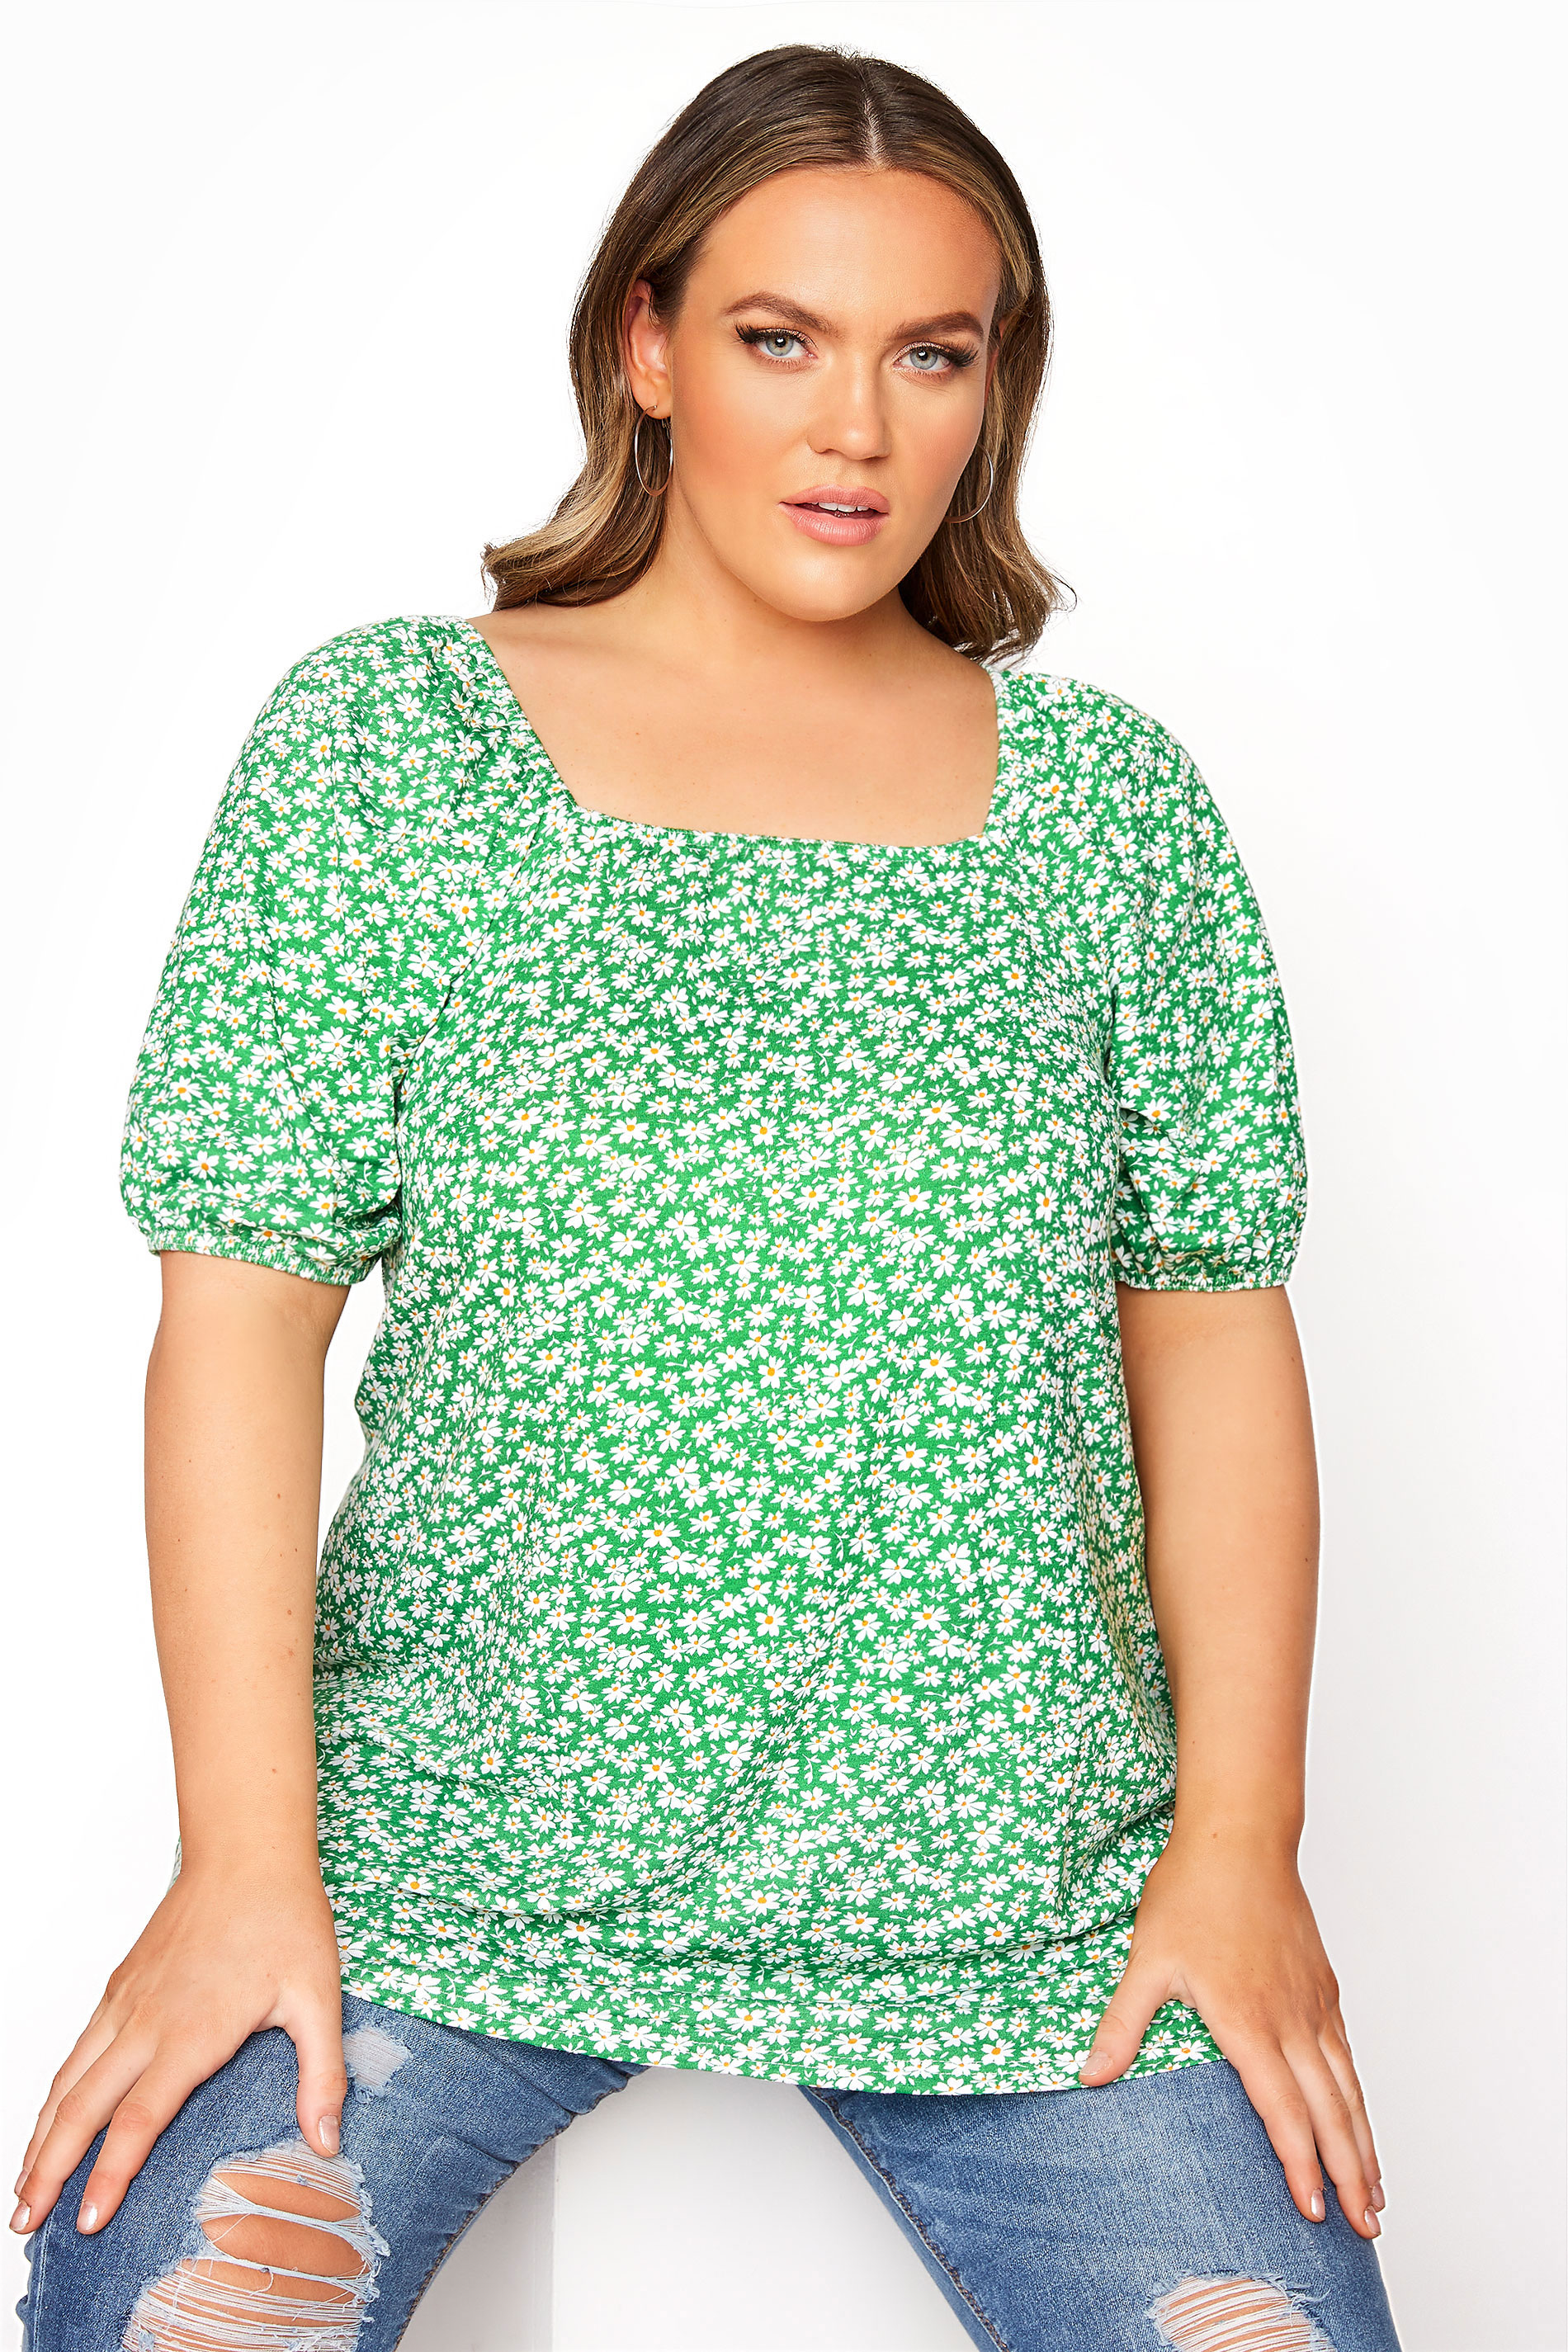 LIMITED COLLECTION Bright Green Daisy Print Square Neck Top